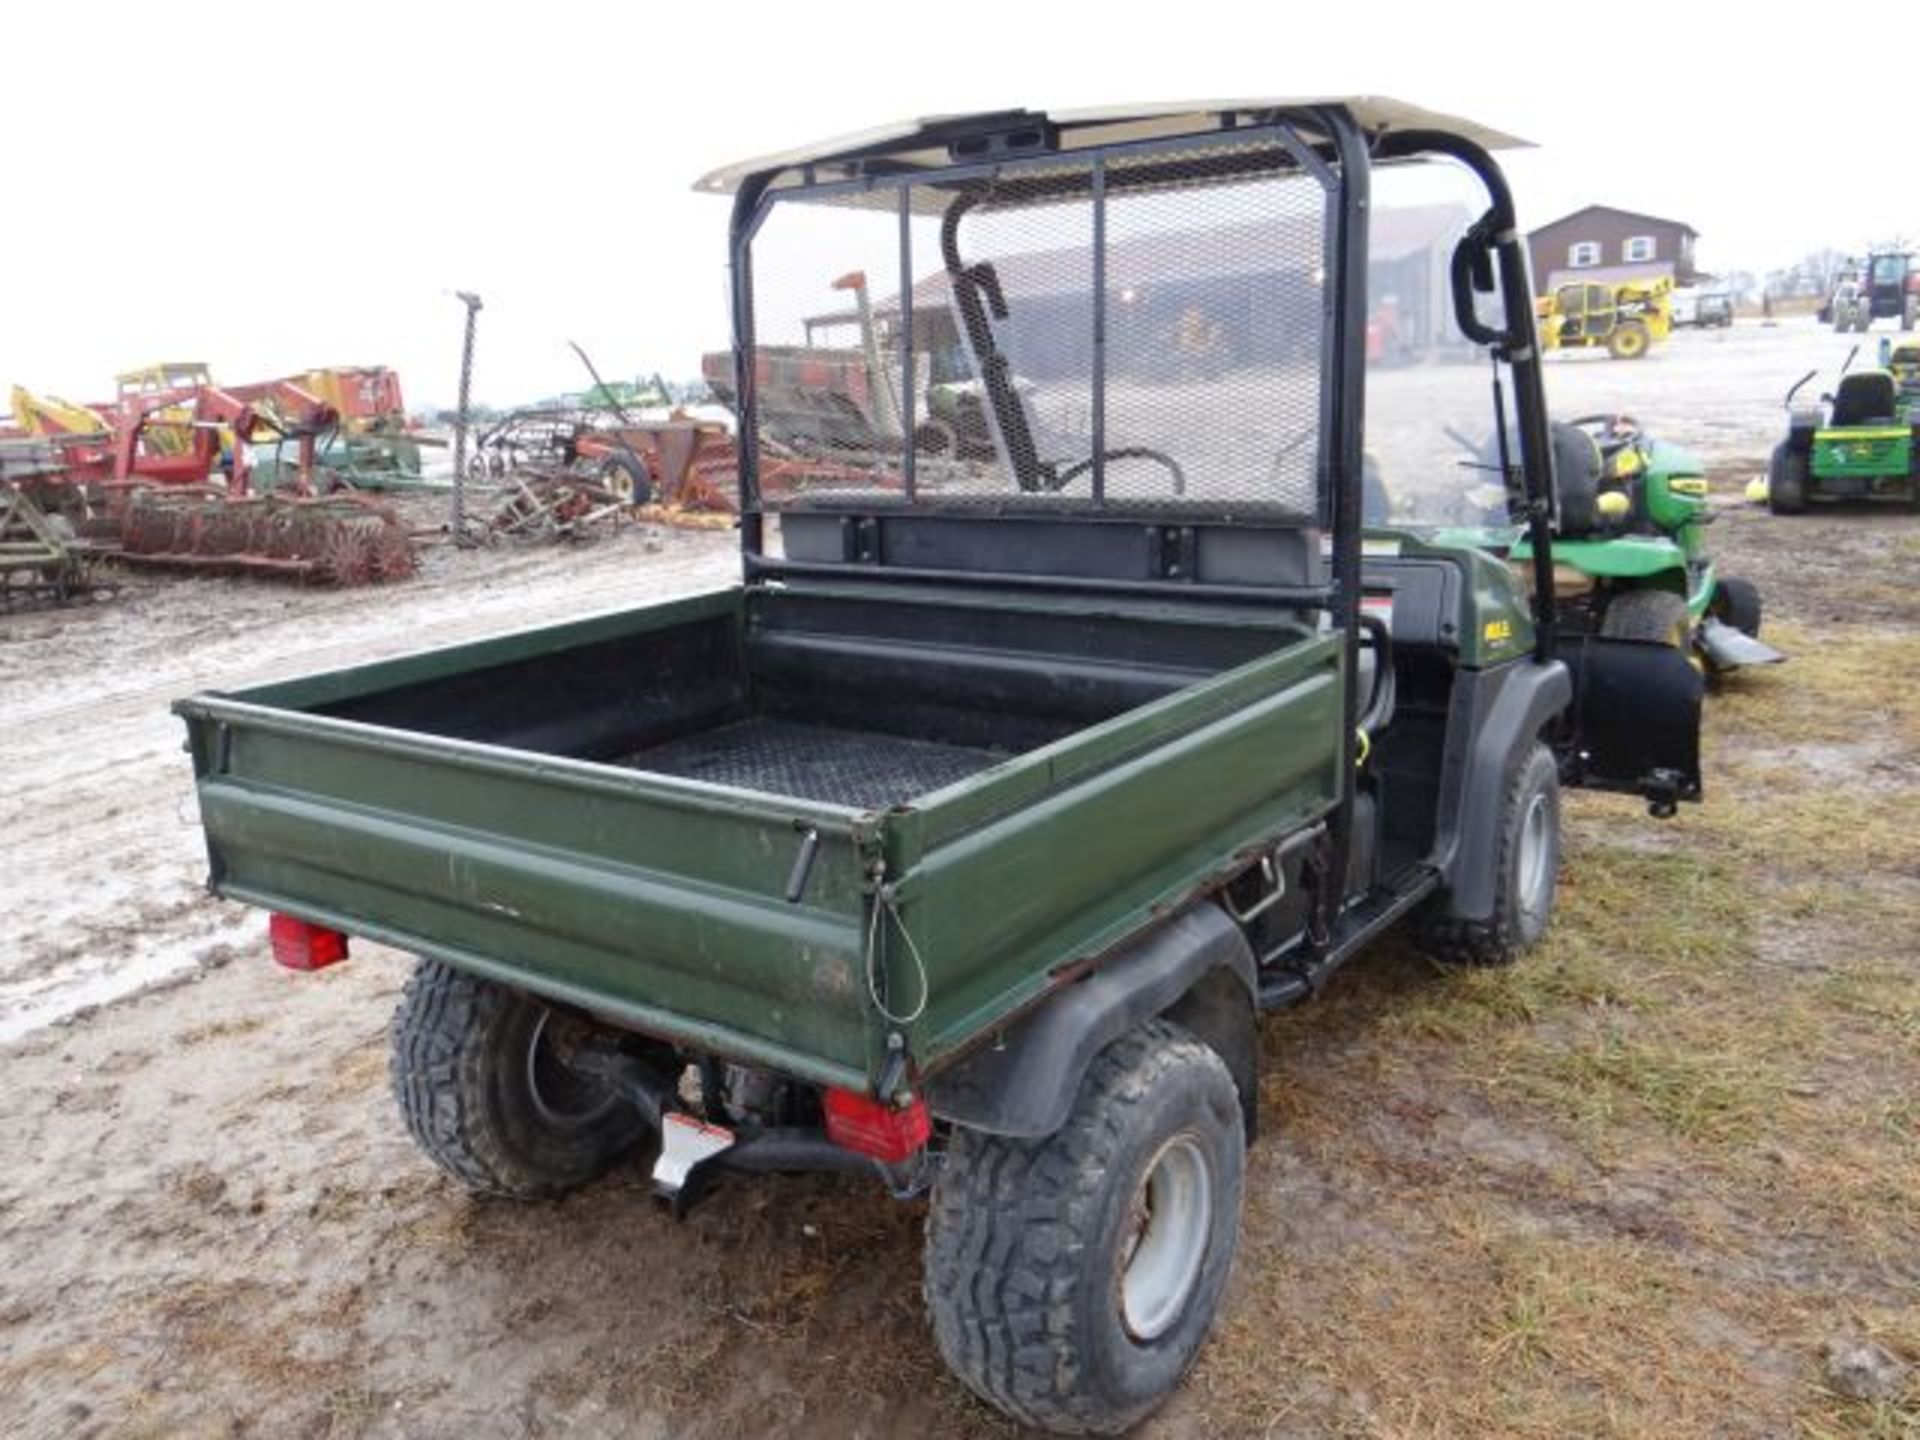 Kawasaki 3010 Mule, 2007 #112654, 960 hrs, Snow Blade, Power Lift, 4wd, Poly Windshield and Roof - Image 3 of 3